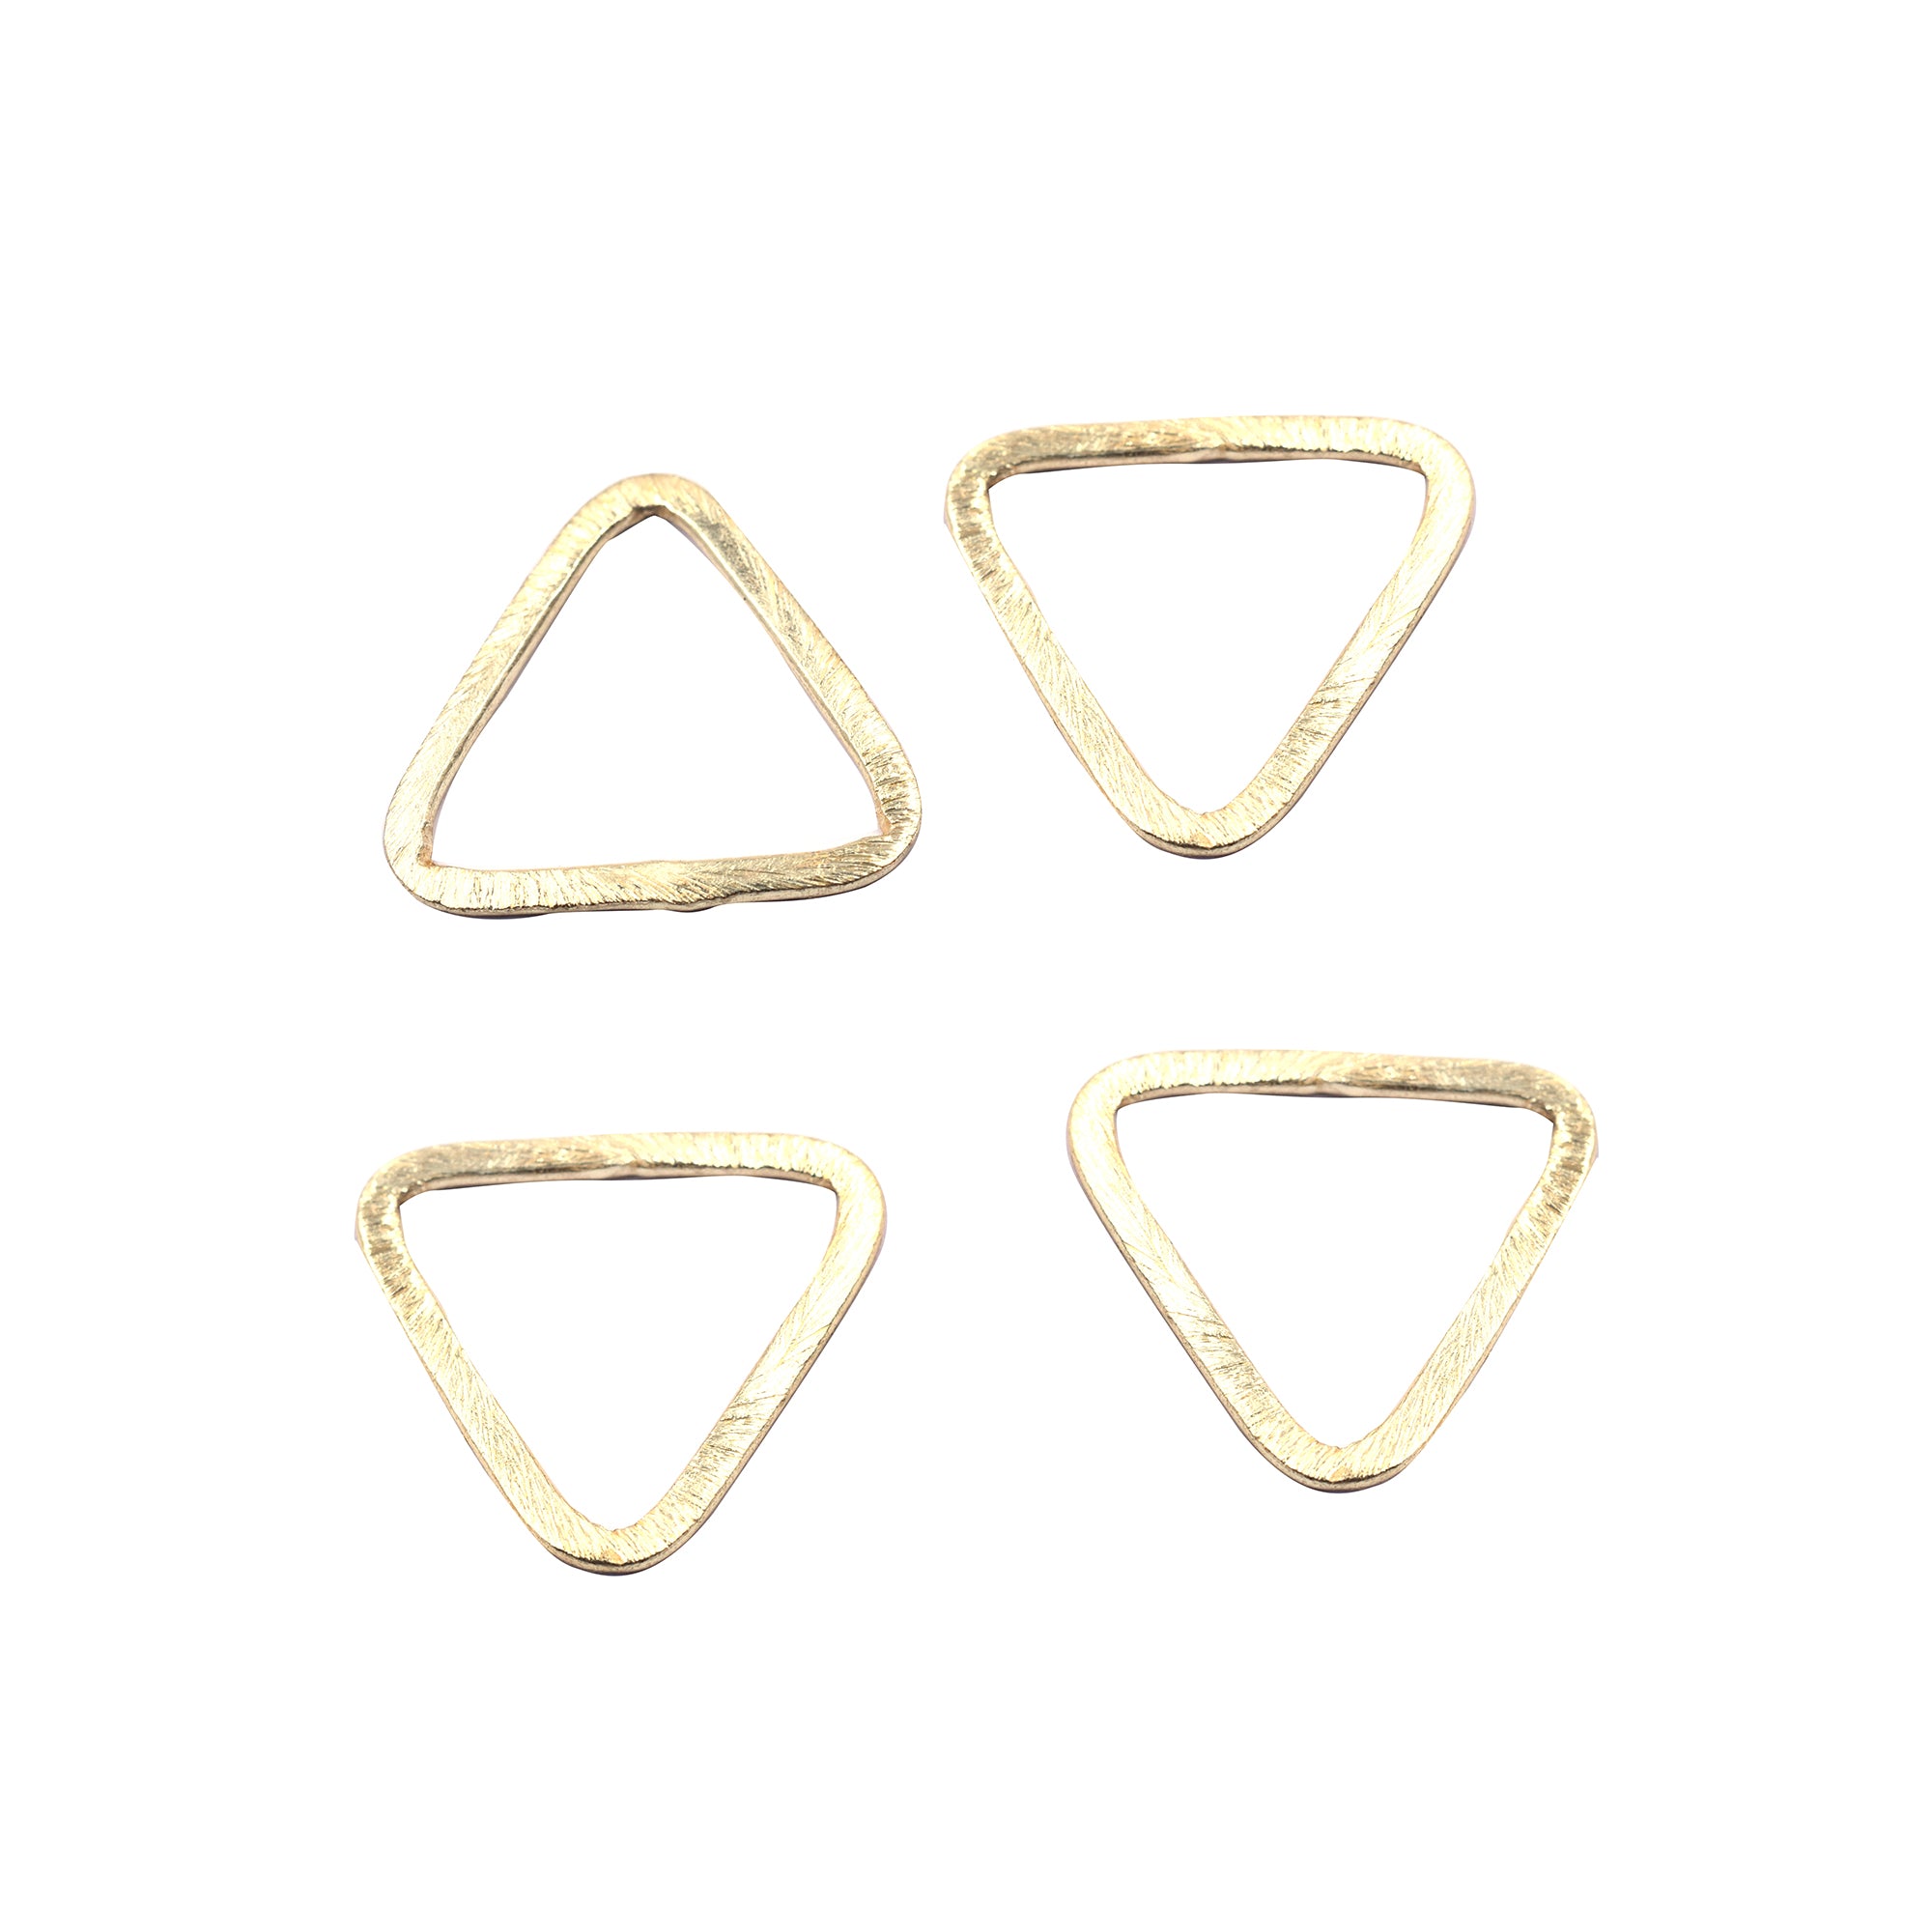 20 Pcs 24mm Triangle Brushed Matte Finish Links Hoops Connector Gold Plated Copper